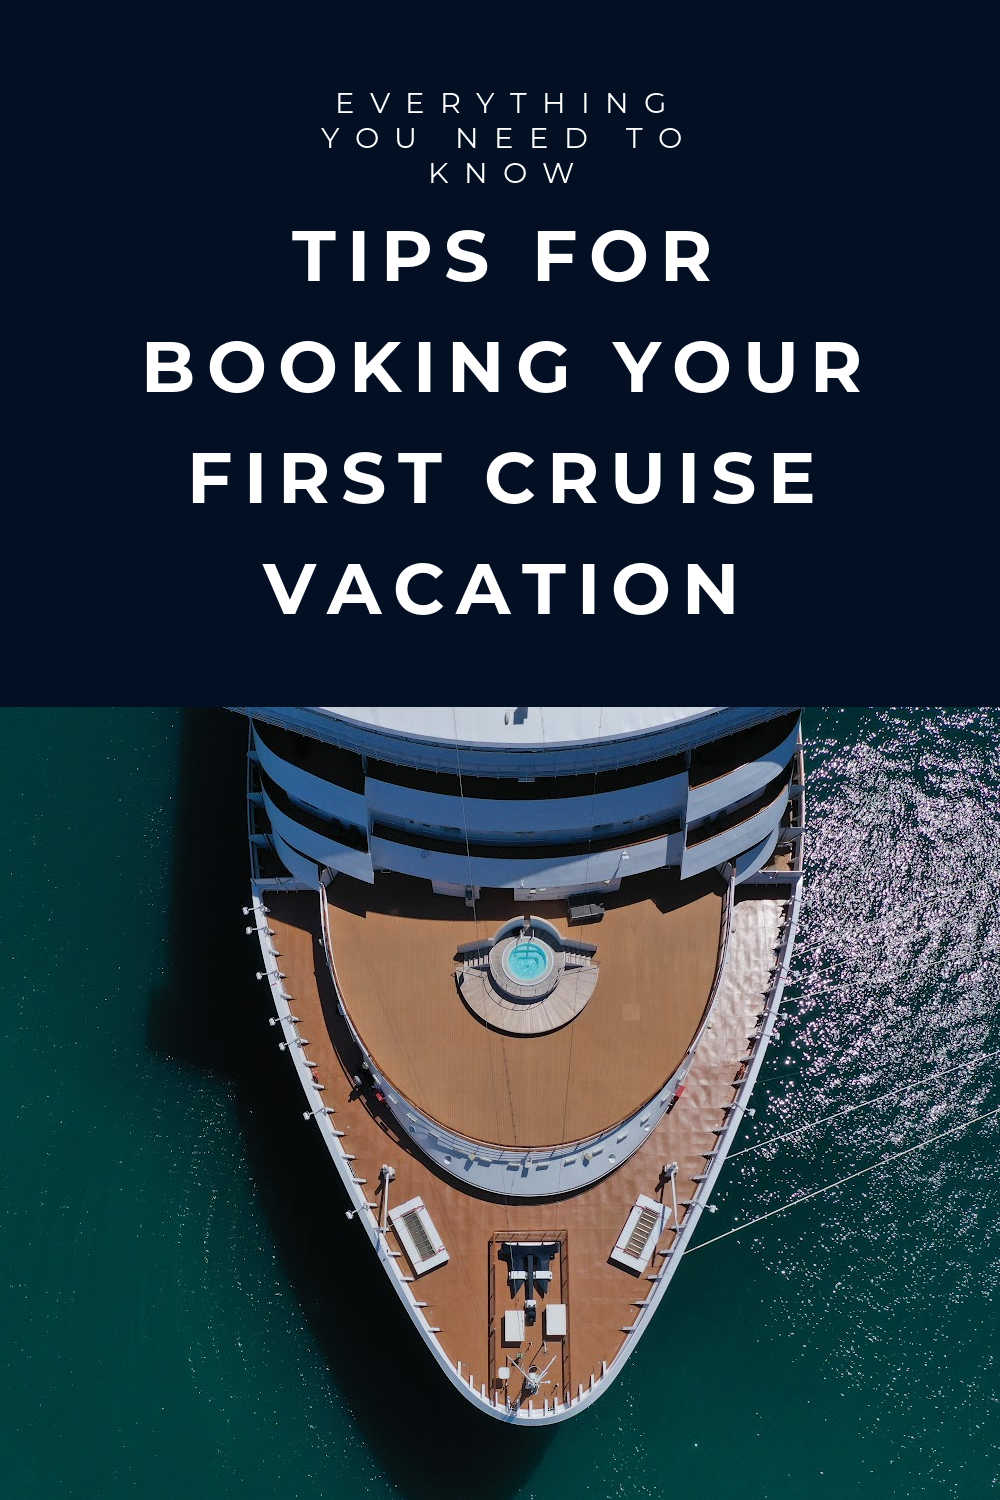 TIPS FOR BOOKING YOUR FIRST CRUISE